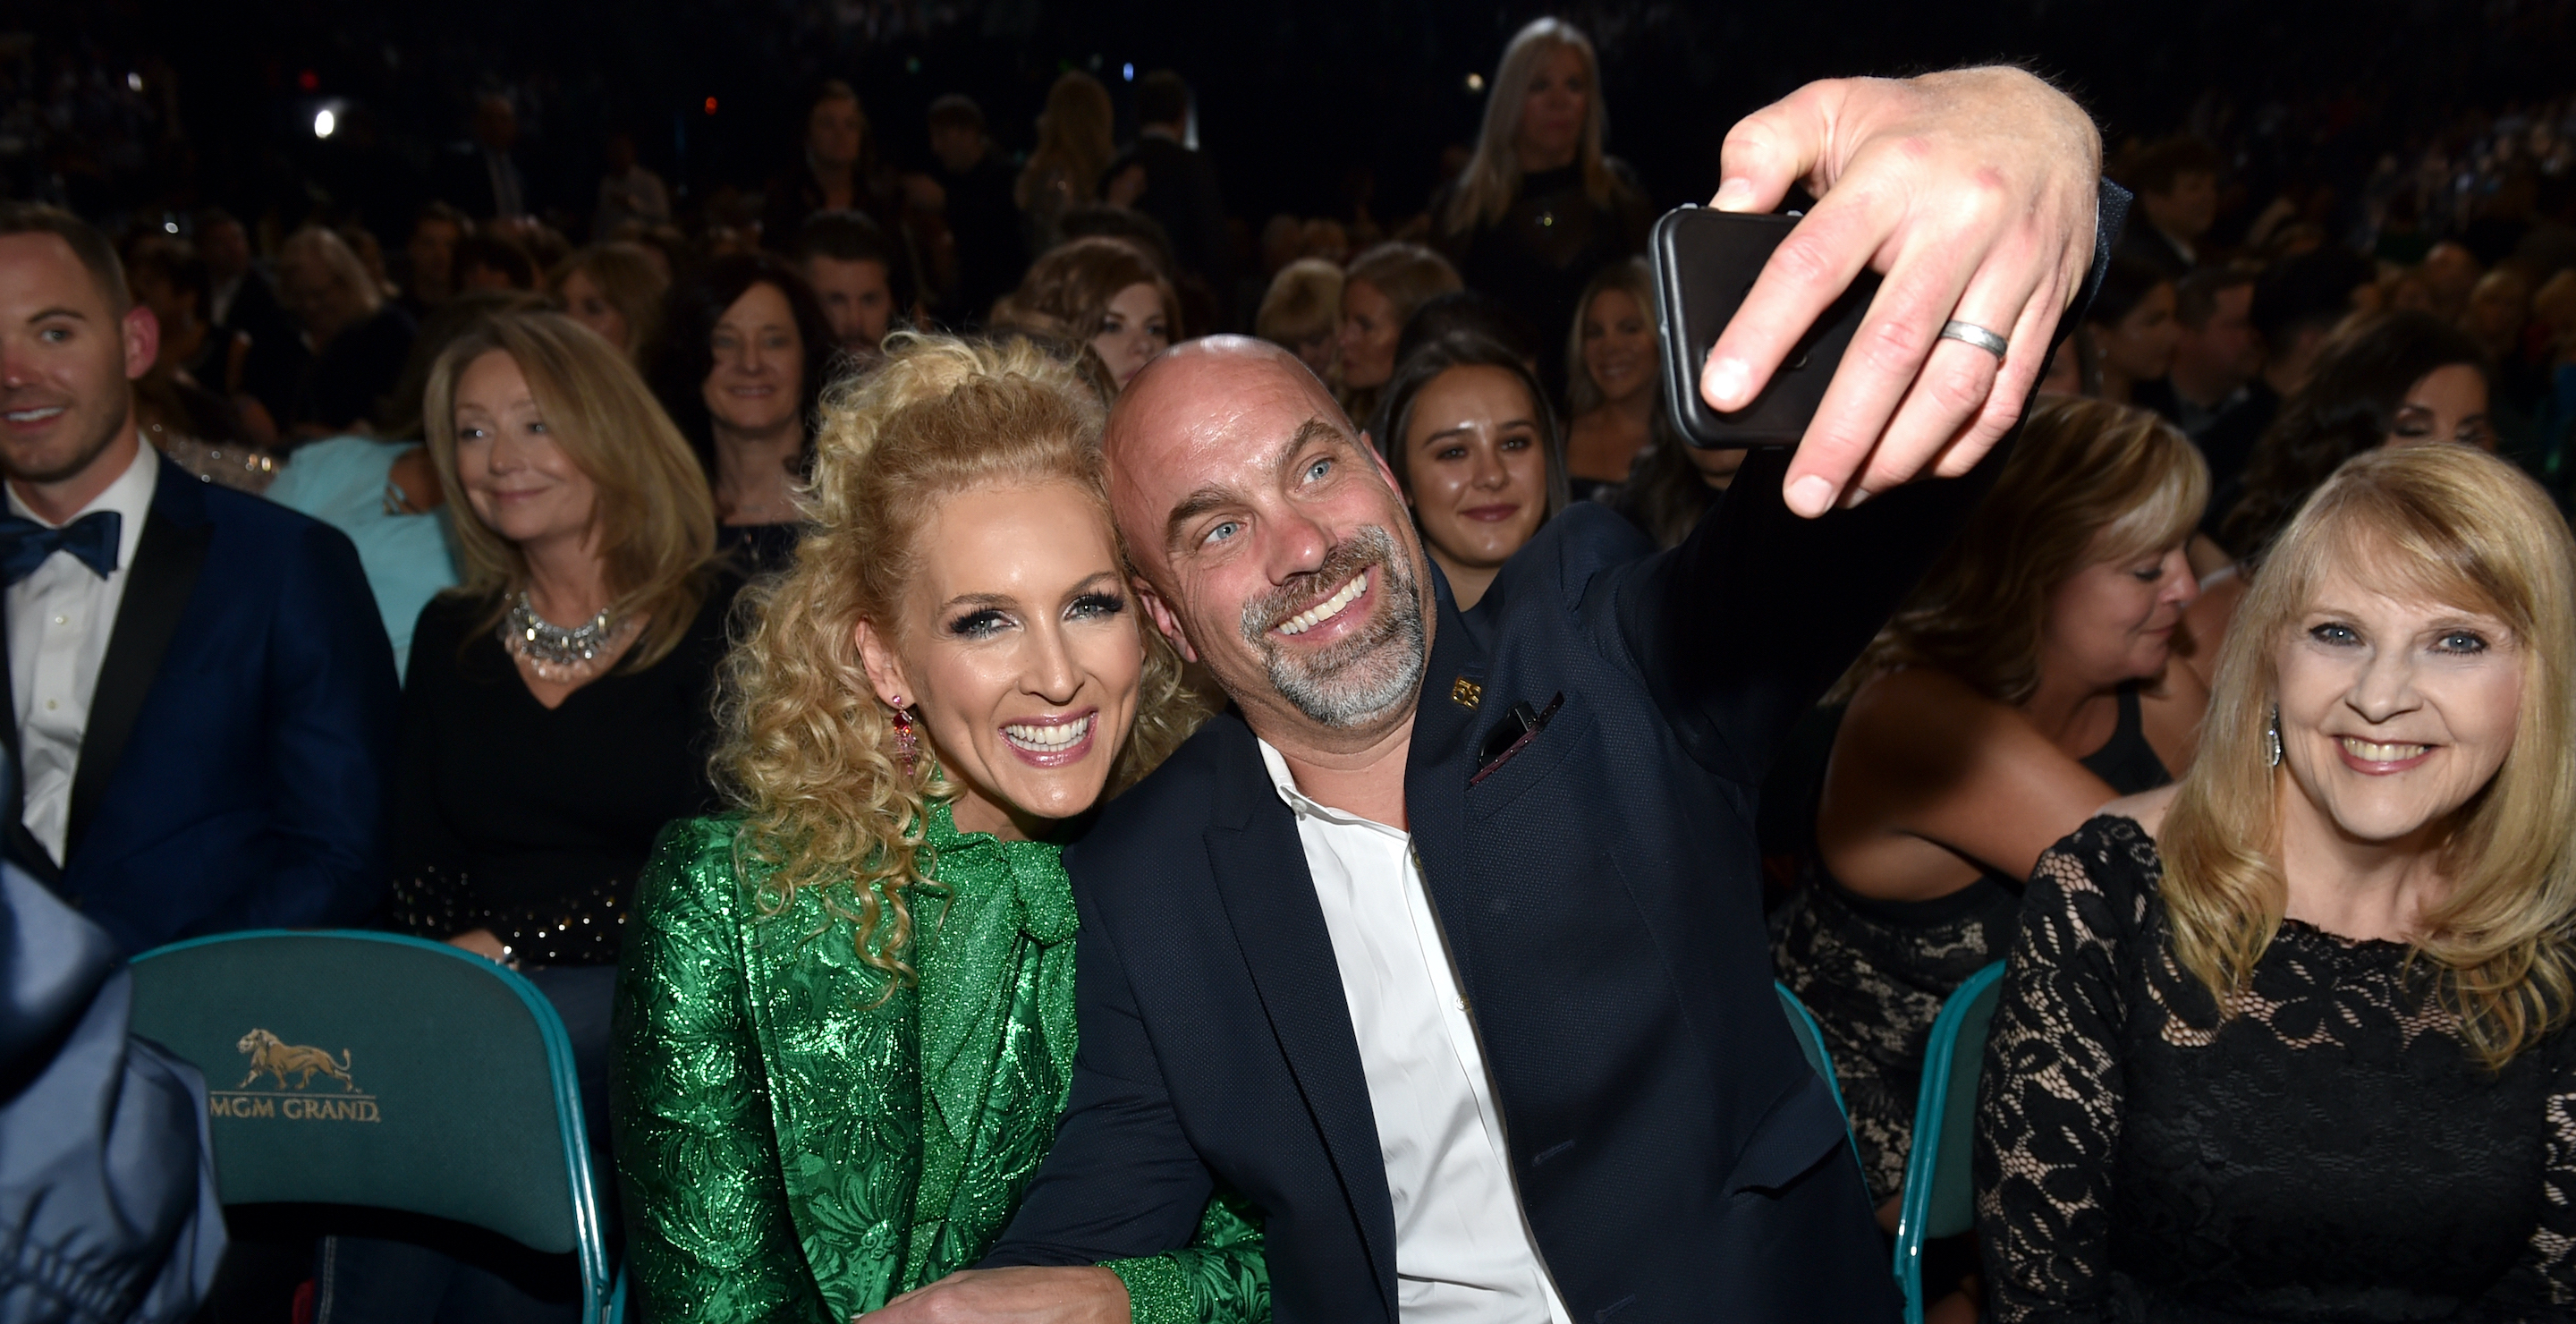 LAS VEGAS, NV - APRIL 15: Kimberly Schlapman (L) and Stephen Schlapman take a selfie during the 53rd Academy of Country Music Awards at MGM Grand Garden Arena on April 15, 2018 in Las Vegas, Nevada.